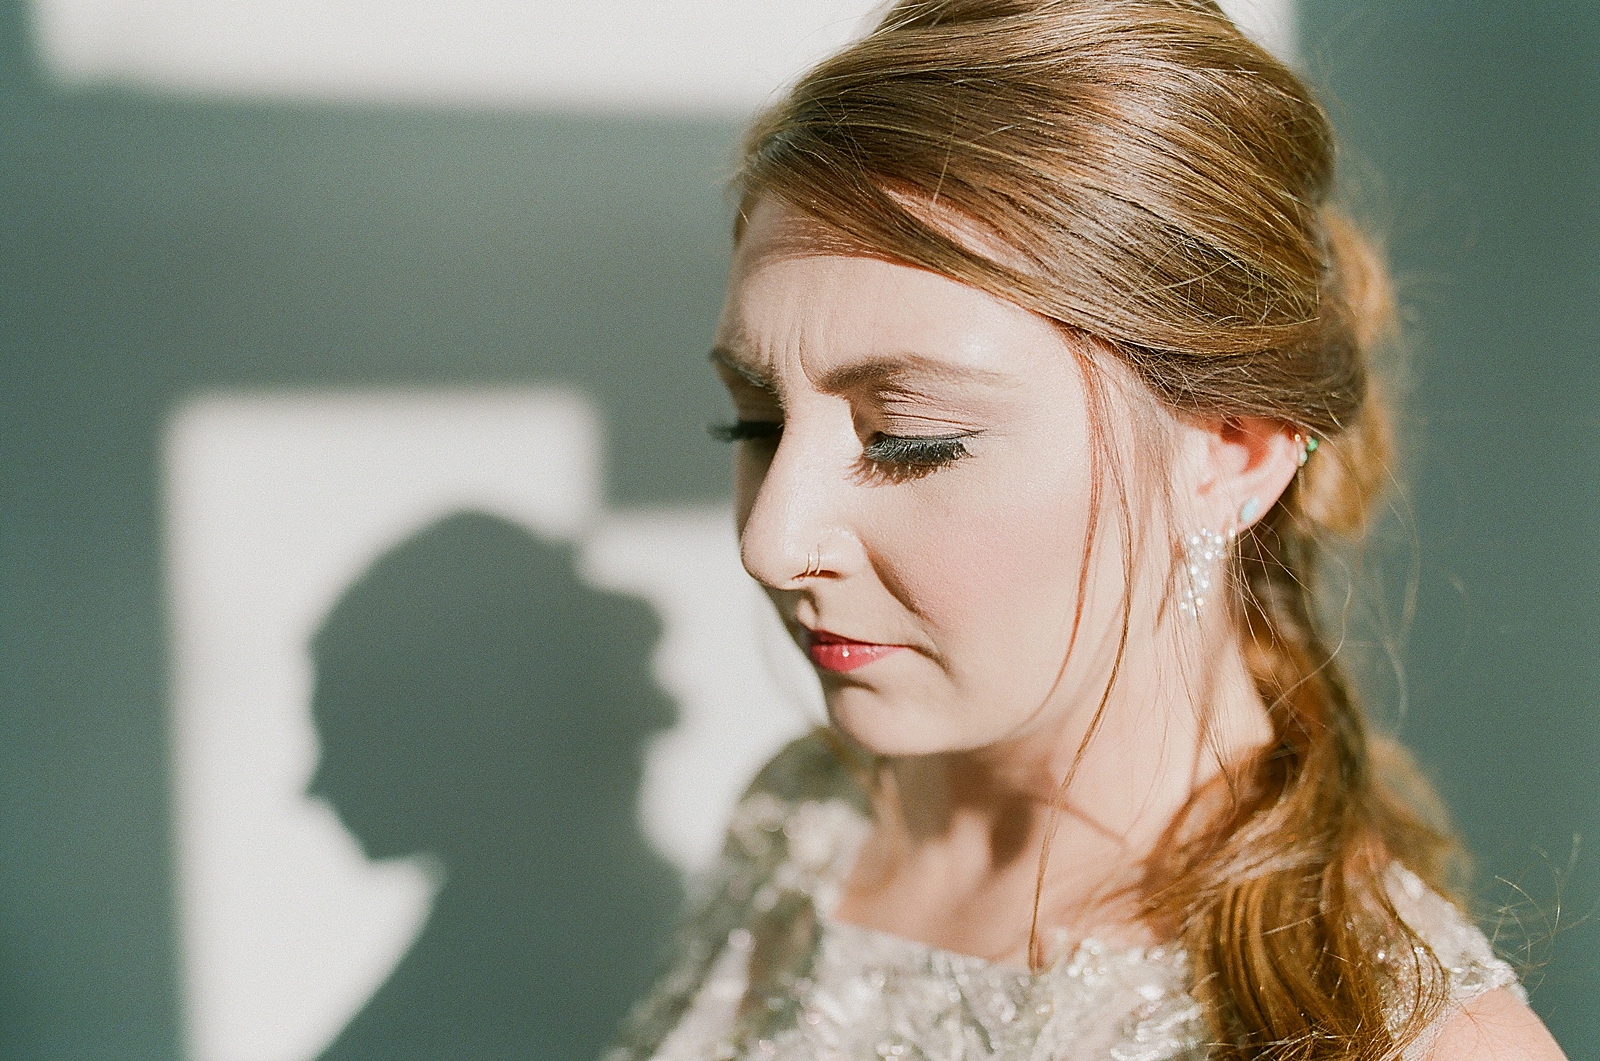 Asheville Bridal Editorial Bride Looking Down Her Shadow on the Wall Photo